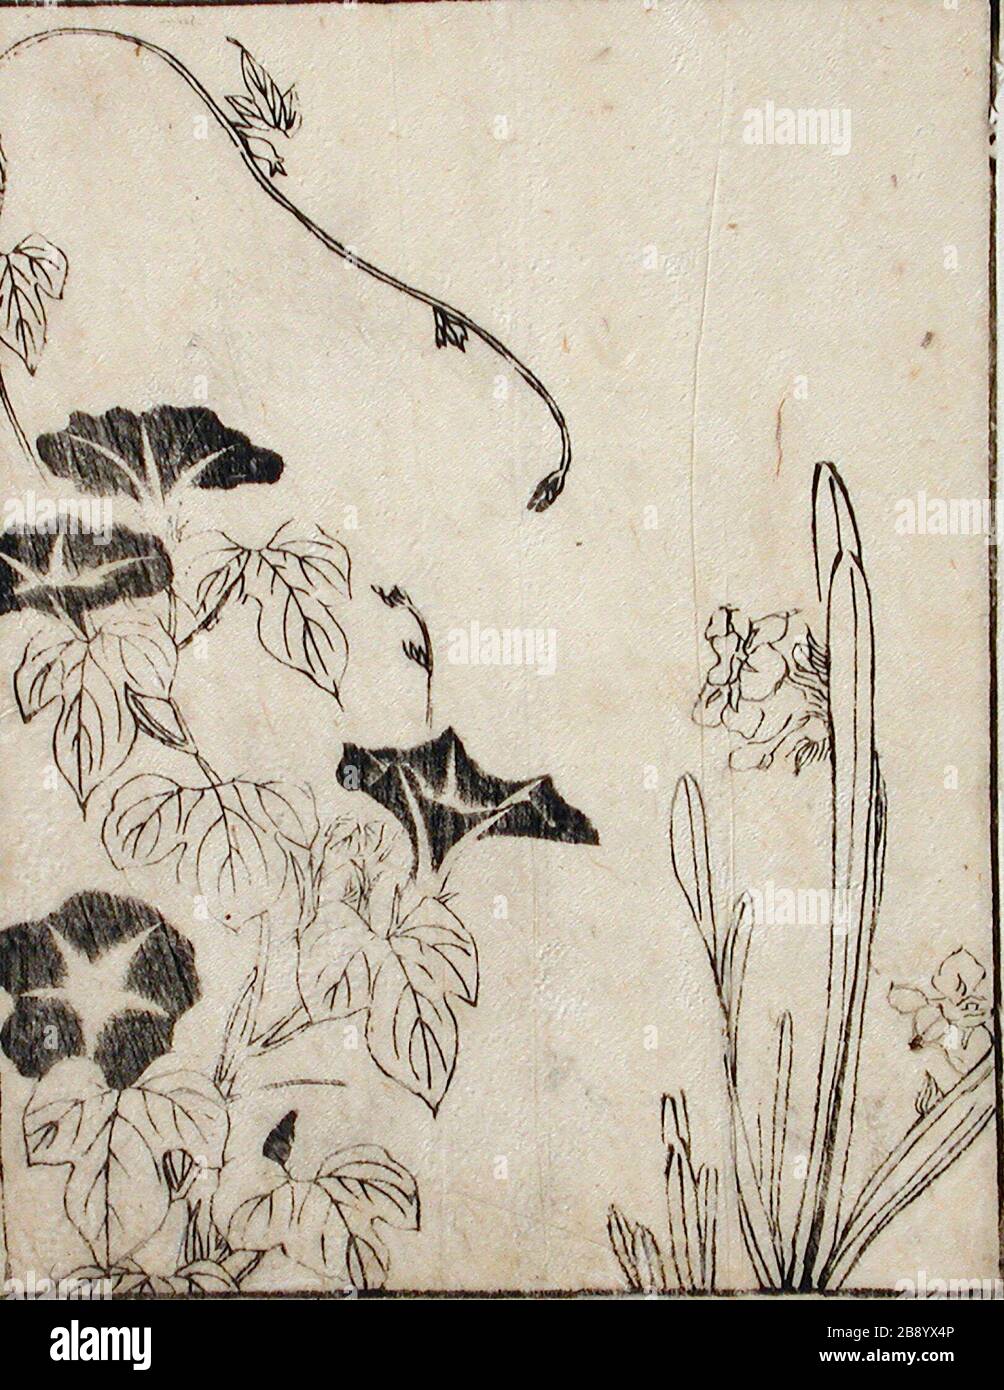 'Morning Glory and Daffodil; English:  Japan, late 18th - early 19th century Prints; woodcuts Black and white woodblock print from a book Image:  8 1/8 x 6 3/8 in. (20.64 x 16.19 cm); Sheet:  8 5/16 x 6 9/16 in. (21.11 x 16.67 cm) Gift of Ruth and Milton Hecht (M.2000.104.12) Japanese Art; Late 18th - early 19th century; ' Stock Photo